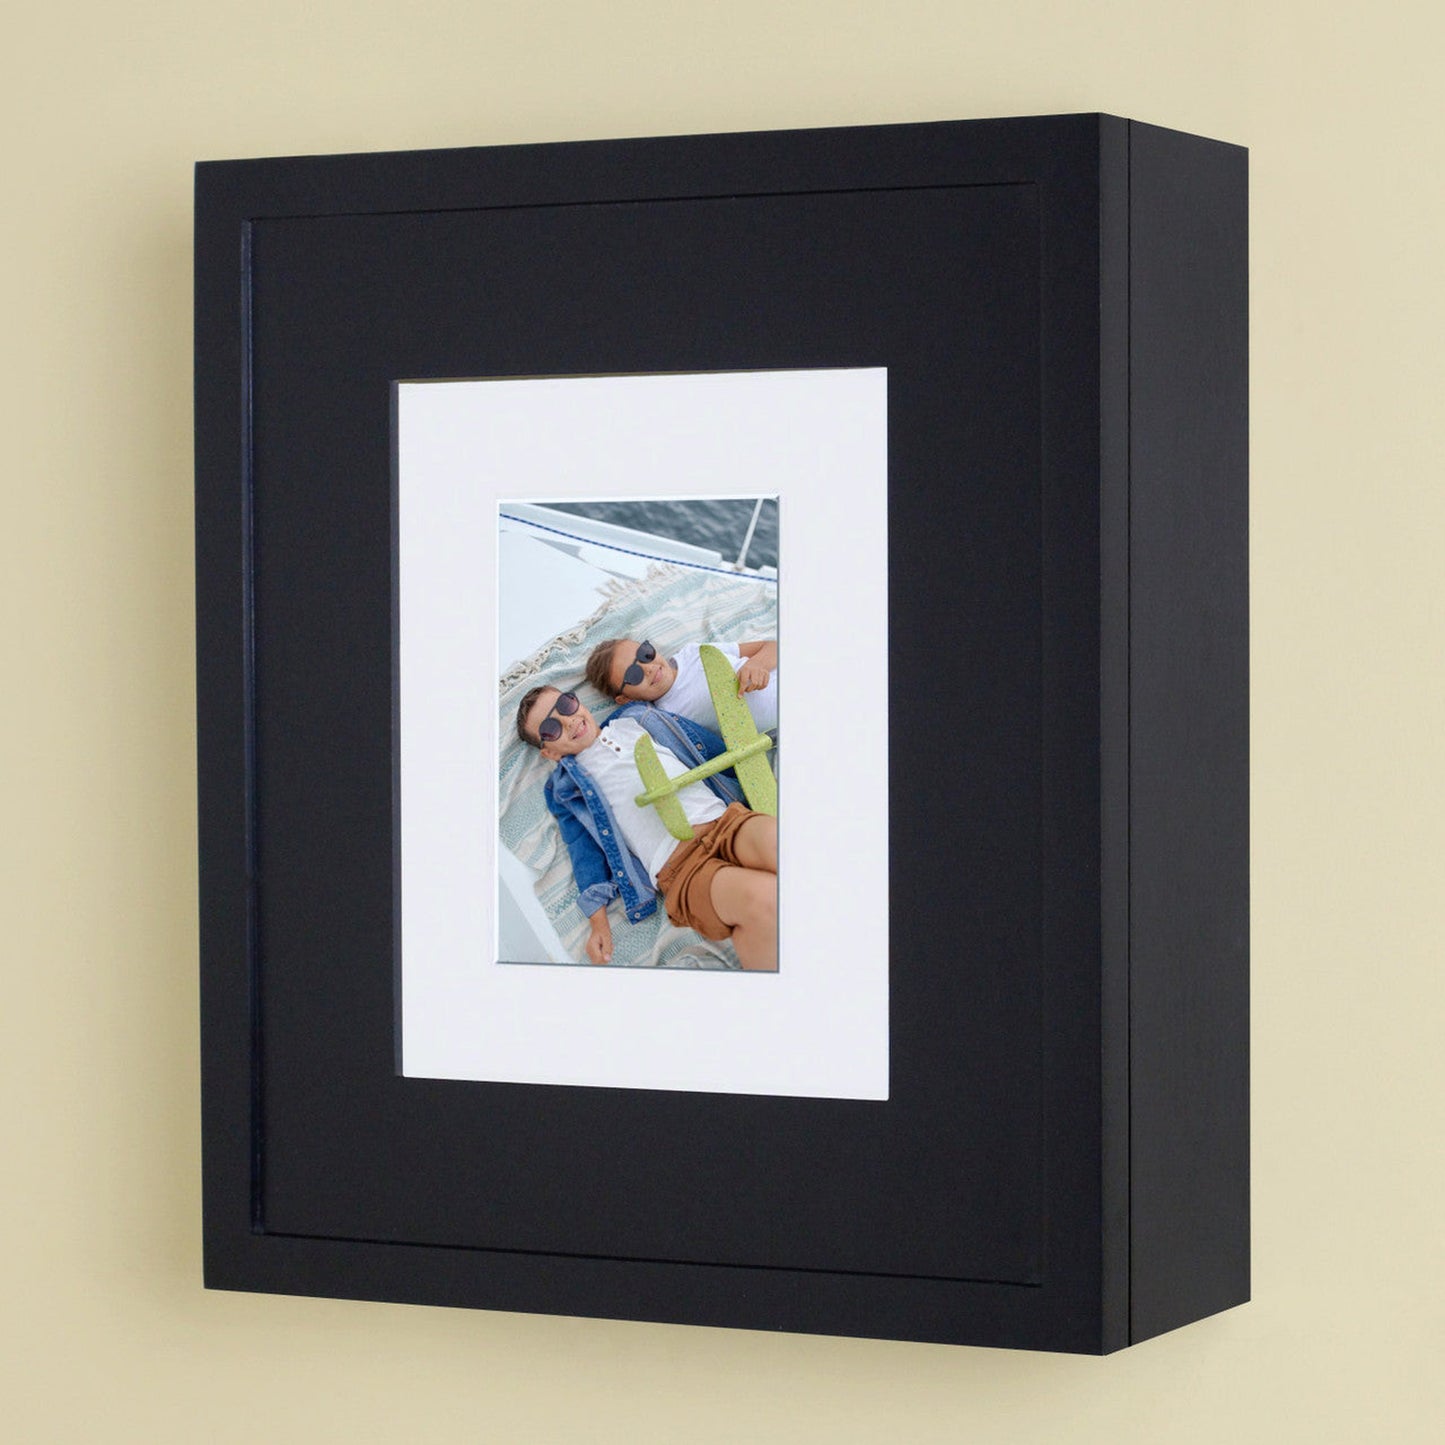 Fox Hollow Furnishings 15" x 13" Black Compact Wall Mount Picture Frame Medicine Cabinet With Ivory 5" x 7" Matting